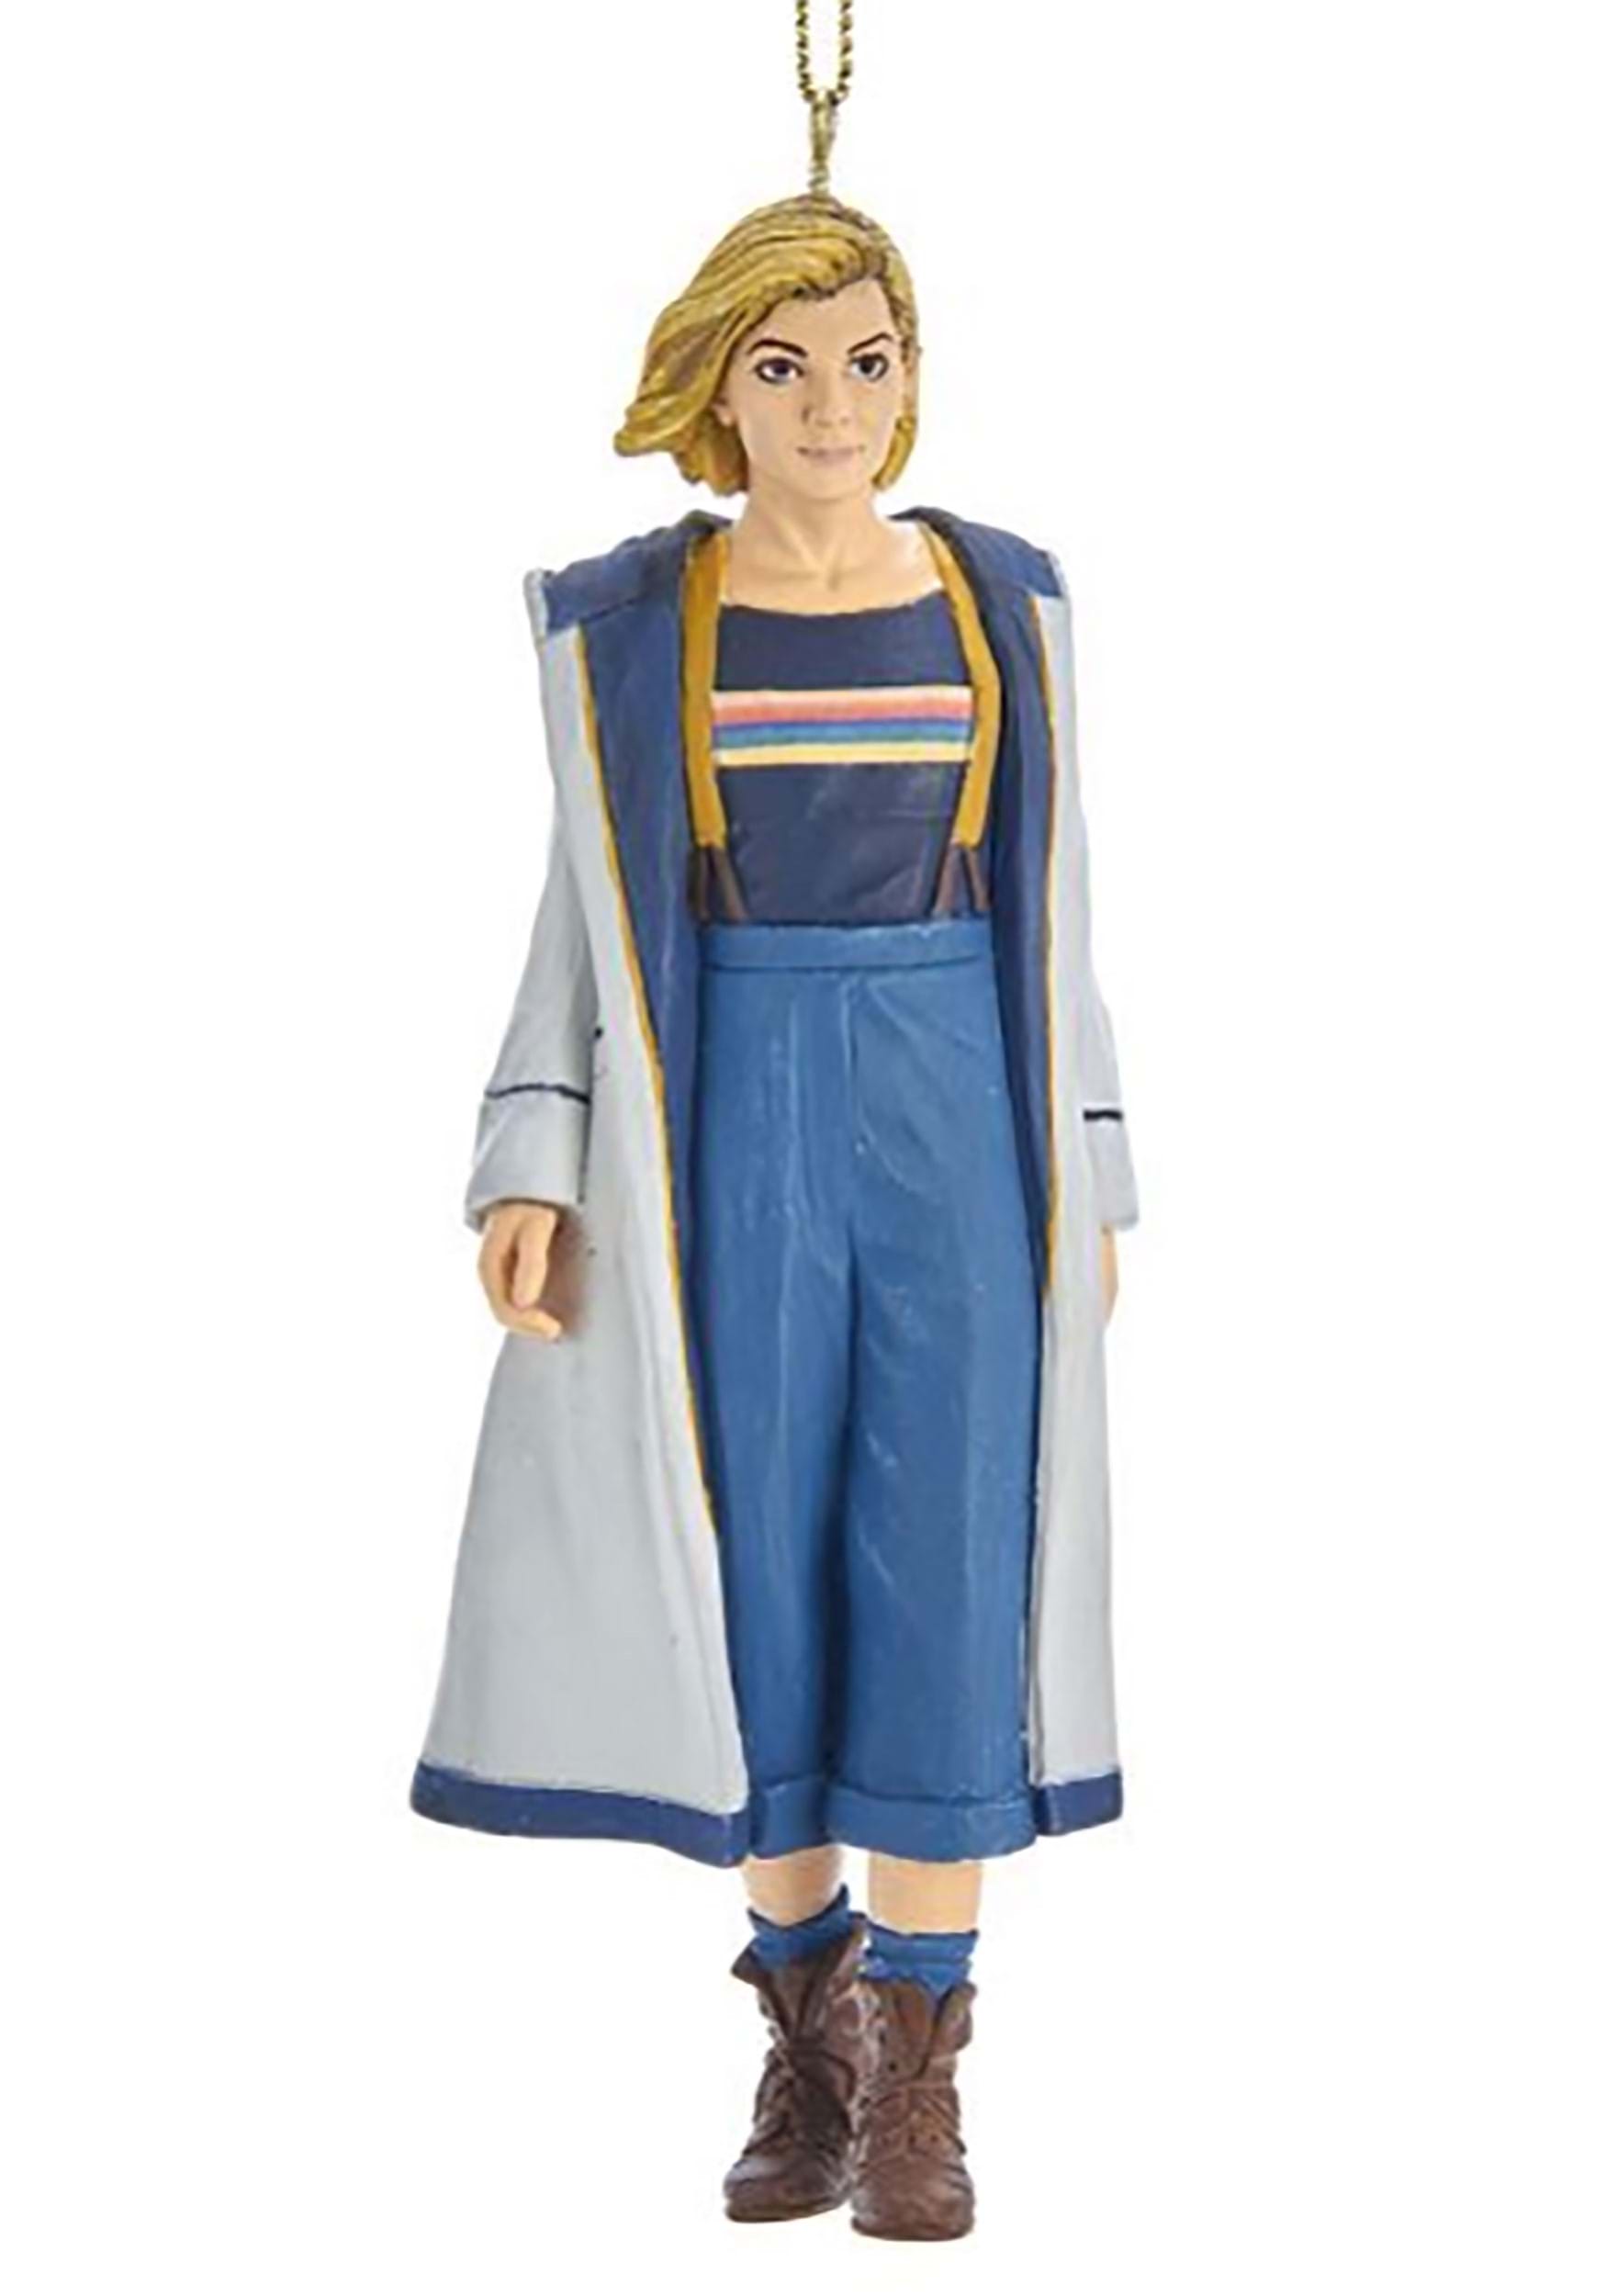 5-Inch Doctor Who 13th Doctor Tree Ornament | Christmas Ornaments